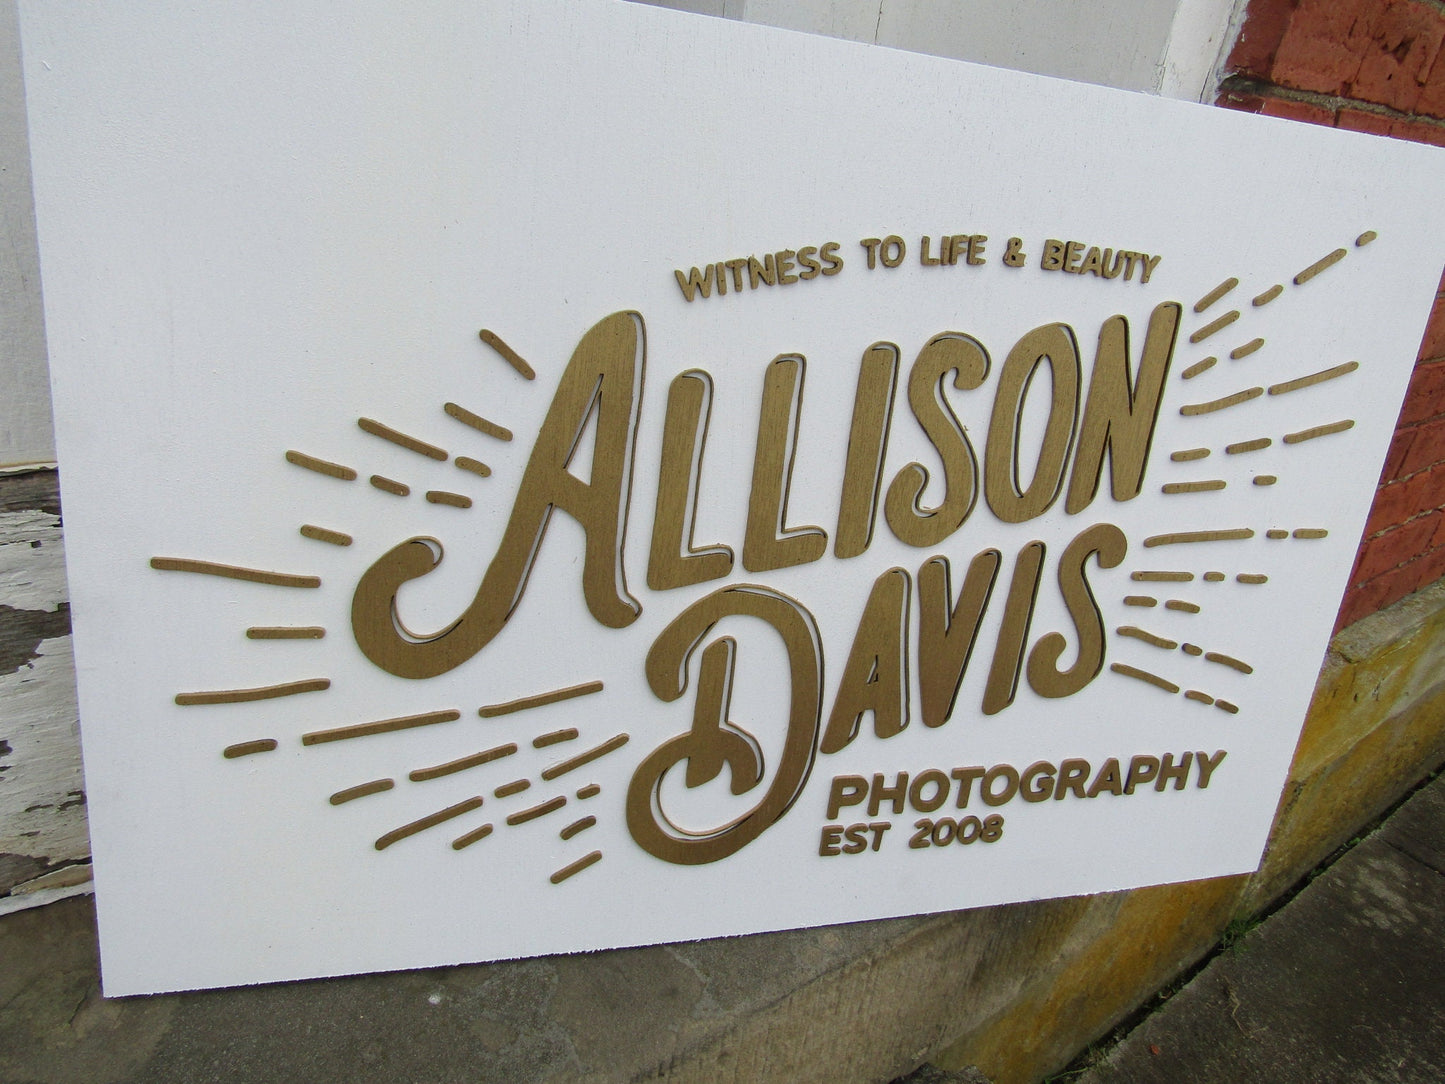 Custom Photography Sign Witness to Life & Beauty Logo Image Raised Letters 3D Gold and White Handmade Wooden Business Signage Wood